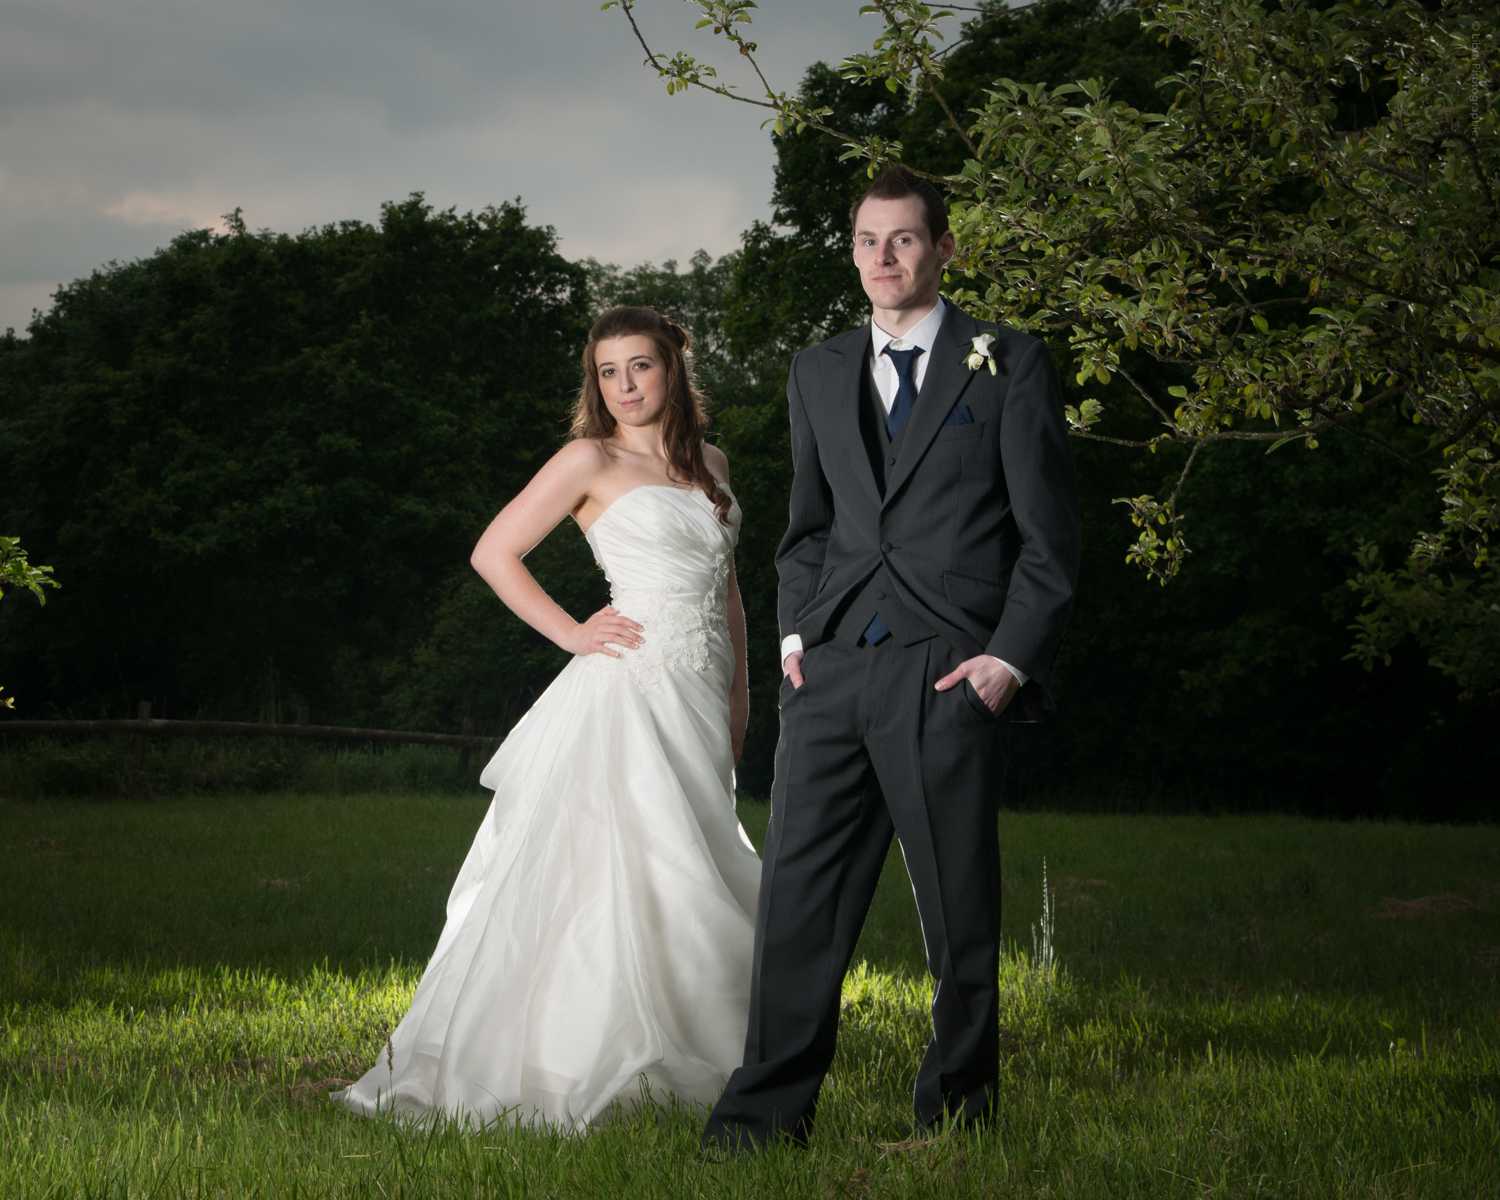 Bride and groom pose in an Orchard near Holt, New Forest